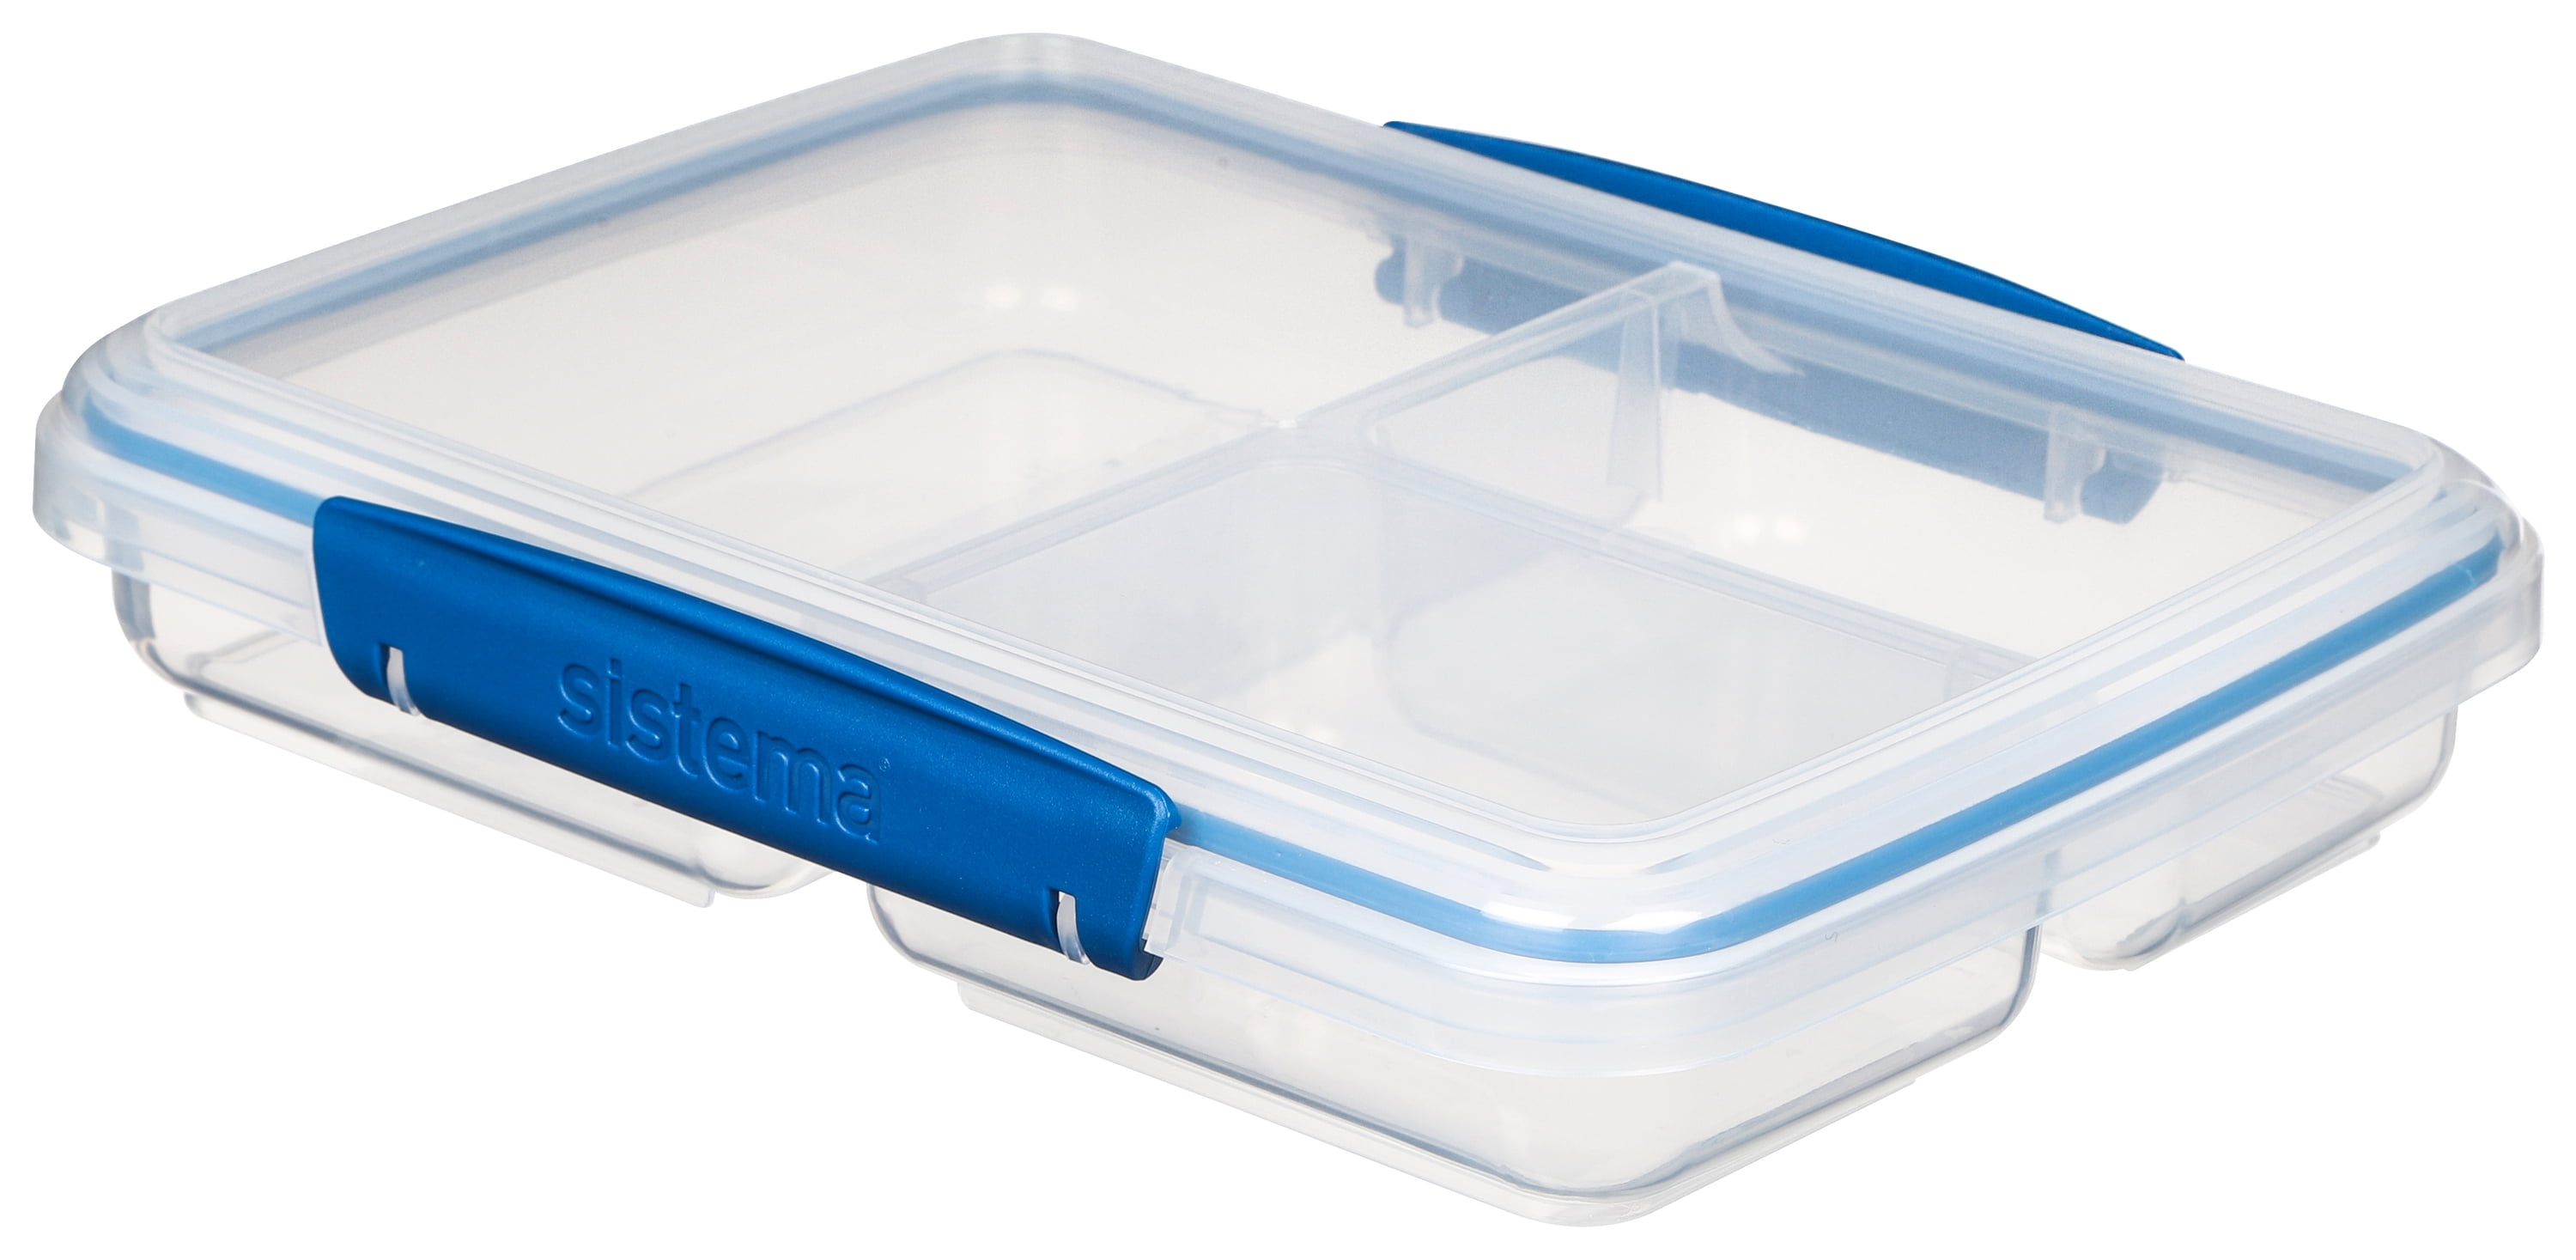 Customer Reviews: Total Home Divided Food Storage Containers, 24